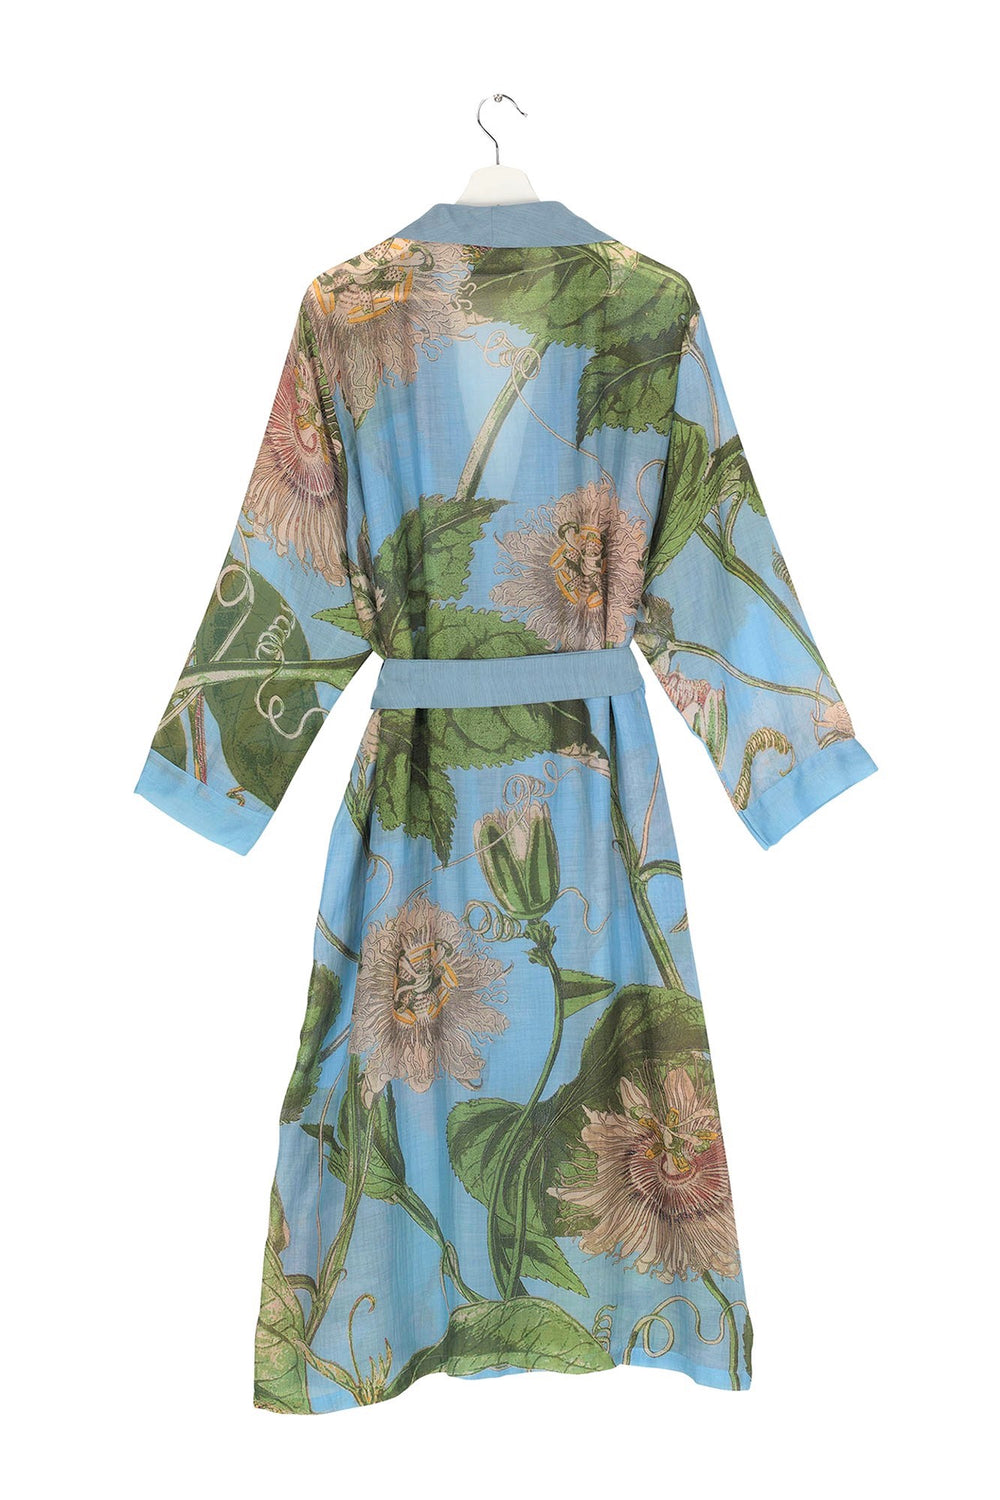 Passion Flower or 'Passiflora' print dressing gown / robe in sky blue as part of the The One Hundred Stars collaboration with KEW Royal Botanic Gardens. 